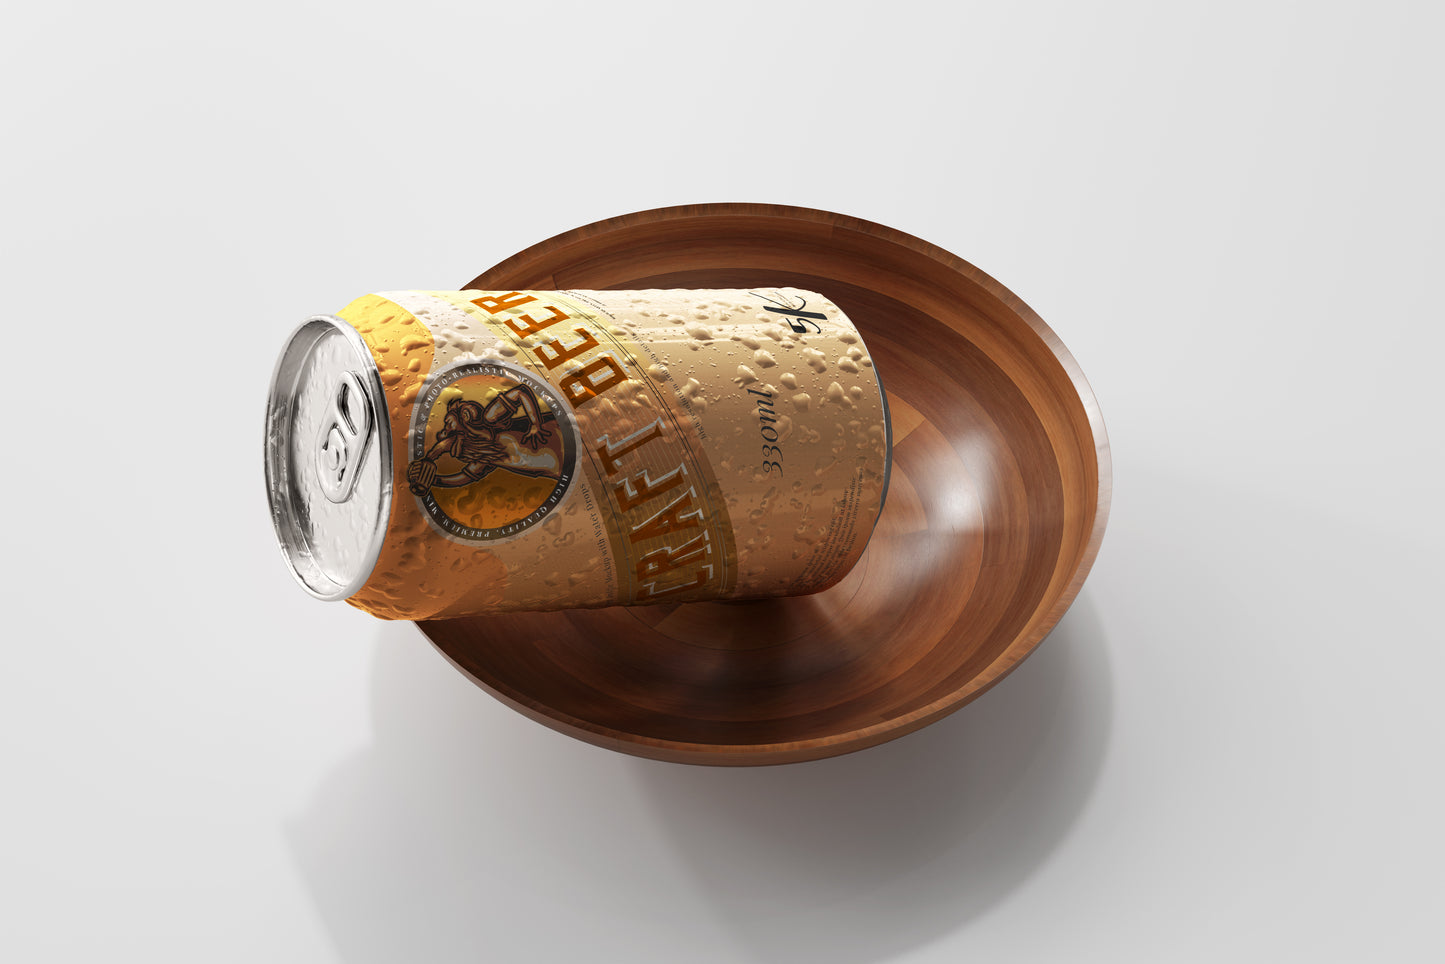 Standard Size Beer Can Mockup with Condensation Effect